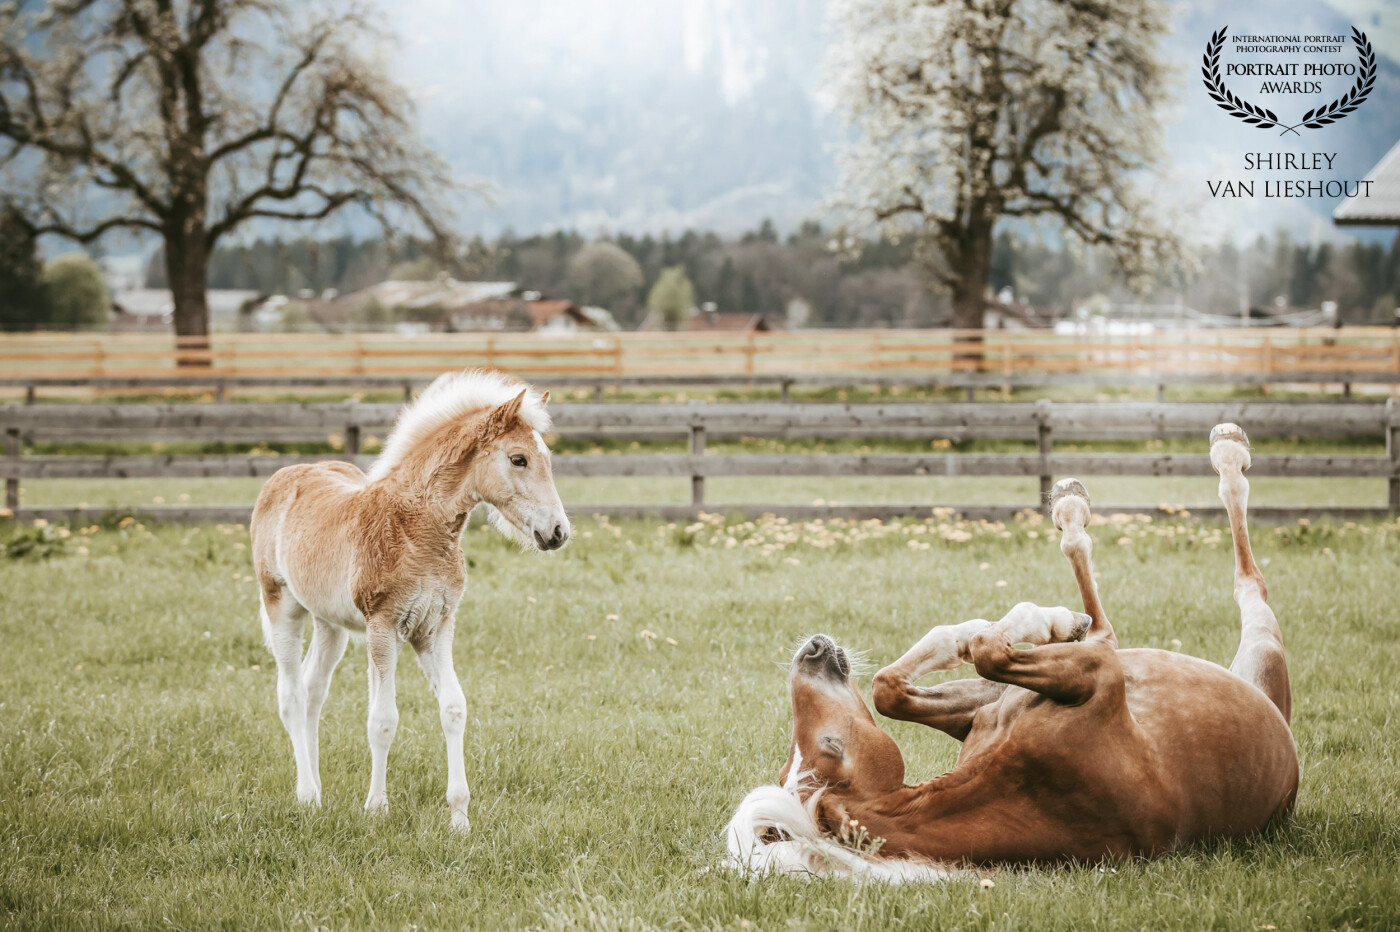 Lovely Haflinger foal with her mummy who is teaching her how to have a nice rollover. This photo was taken during my holiday in Austria at the Fohlenhof Ebbs Stud farm.